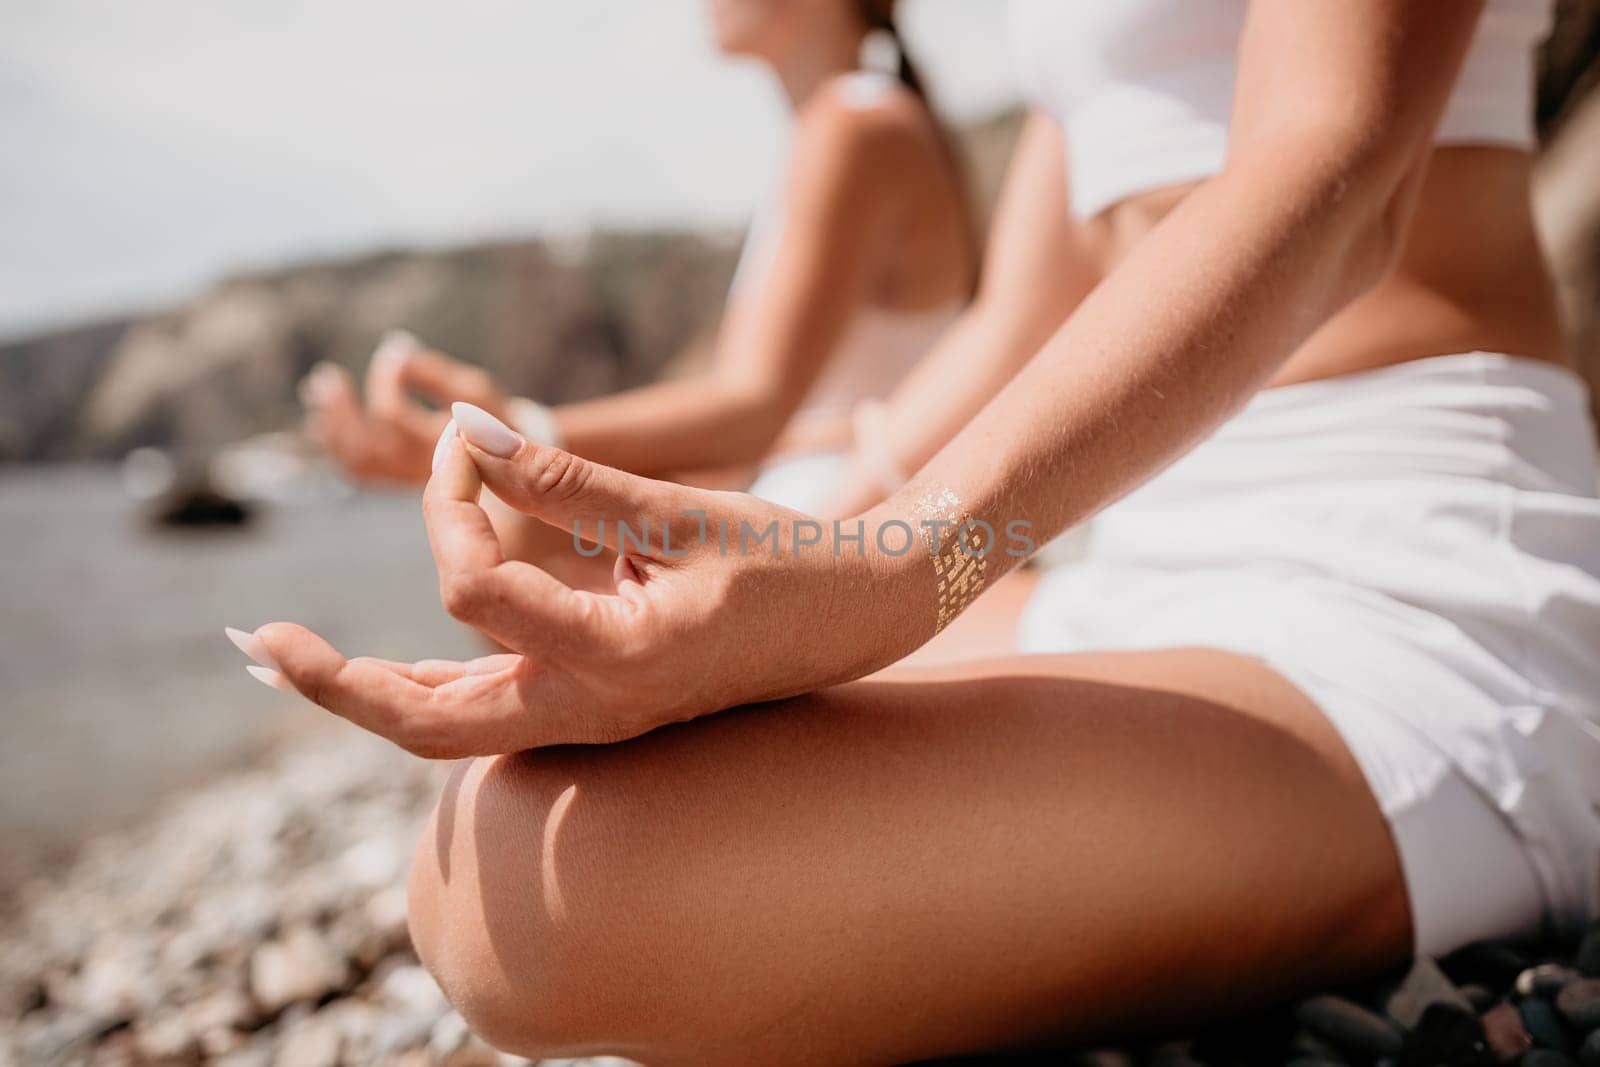 Woman sea yoga. Happy women meditating in yoga pose on the beach, ocean and rock mountains. Motivation and inspirational fit and exercising. Healthy lifestyle outdoors in nature, fitness concept. by panophotograph